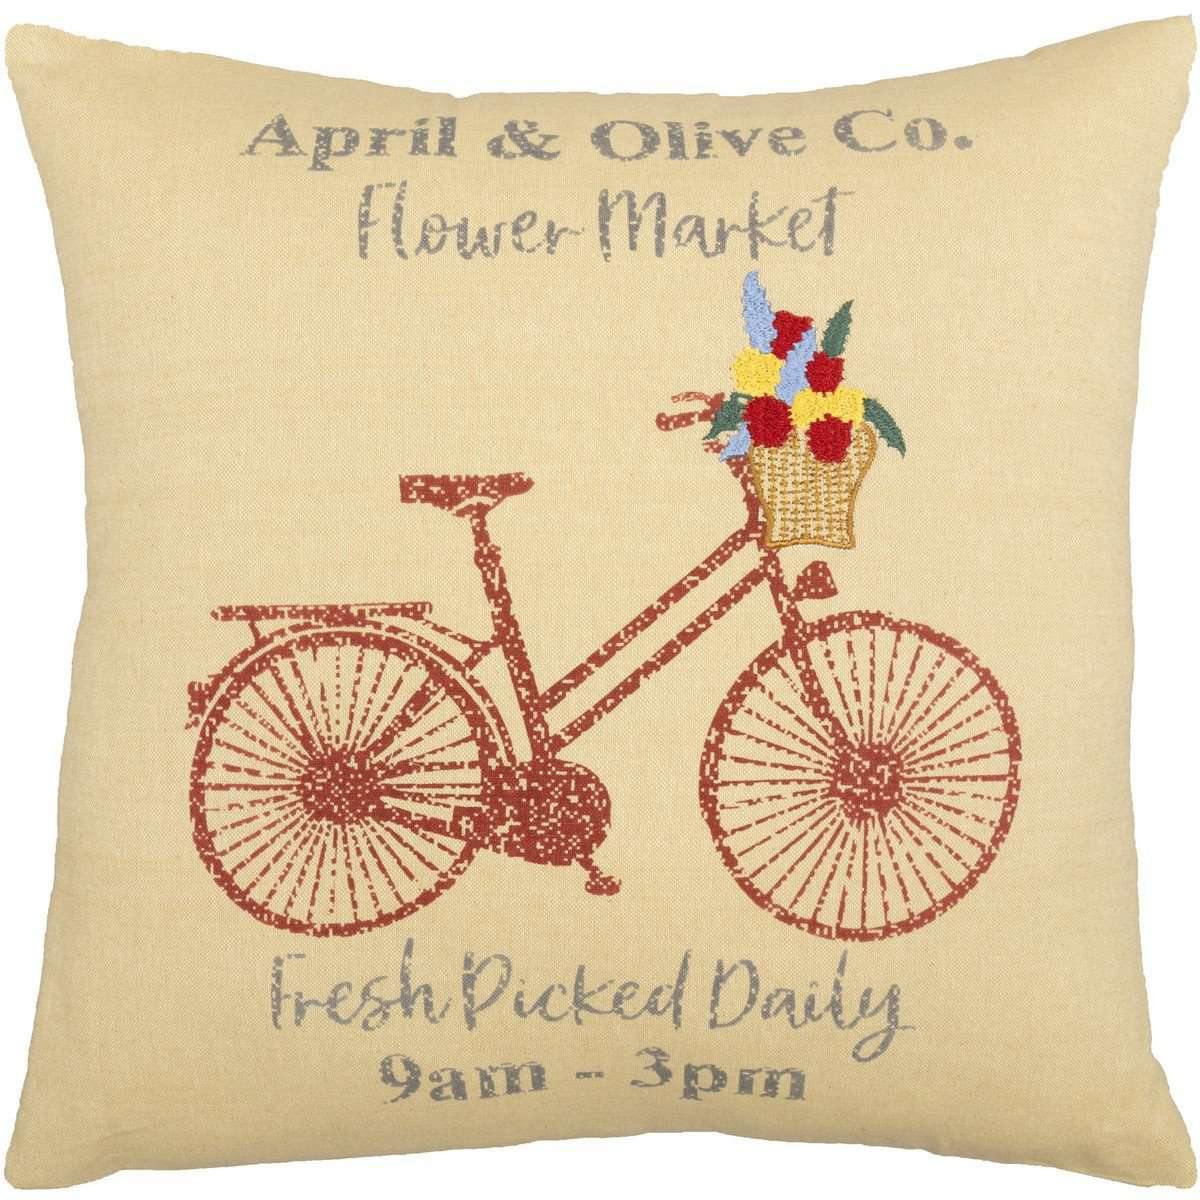 Farmer's Market Flower Market Pillow 18x18 barn red bicycle VHC Brands front